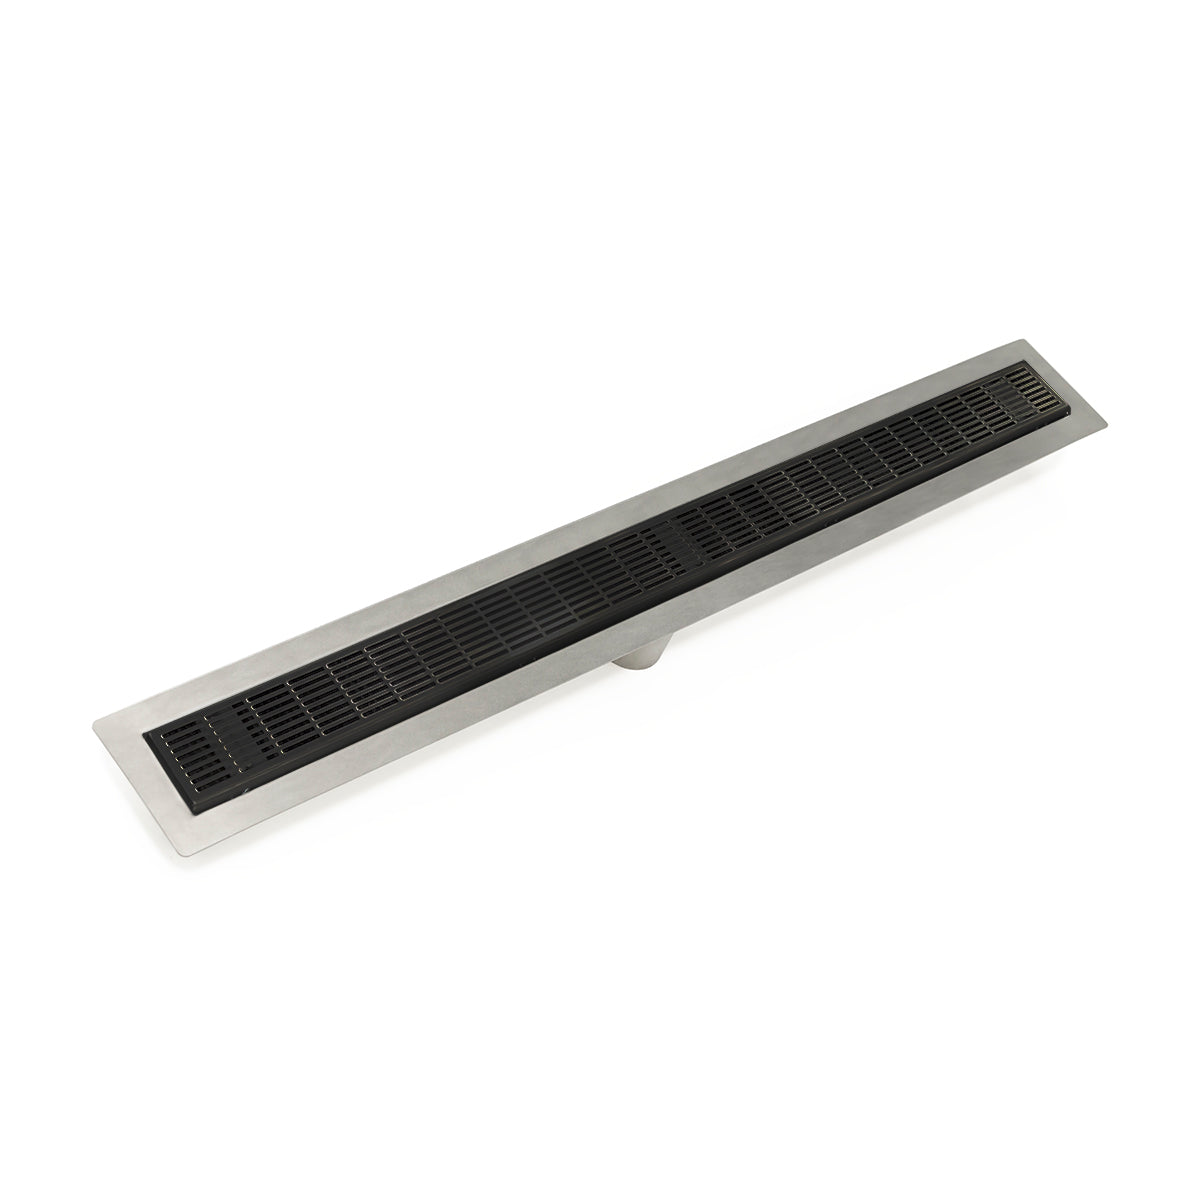 Infinity Drain 24" FF Series Fixed Flange Linear Drain Kit with 2 1/2" Perforated Slotted Grate